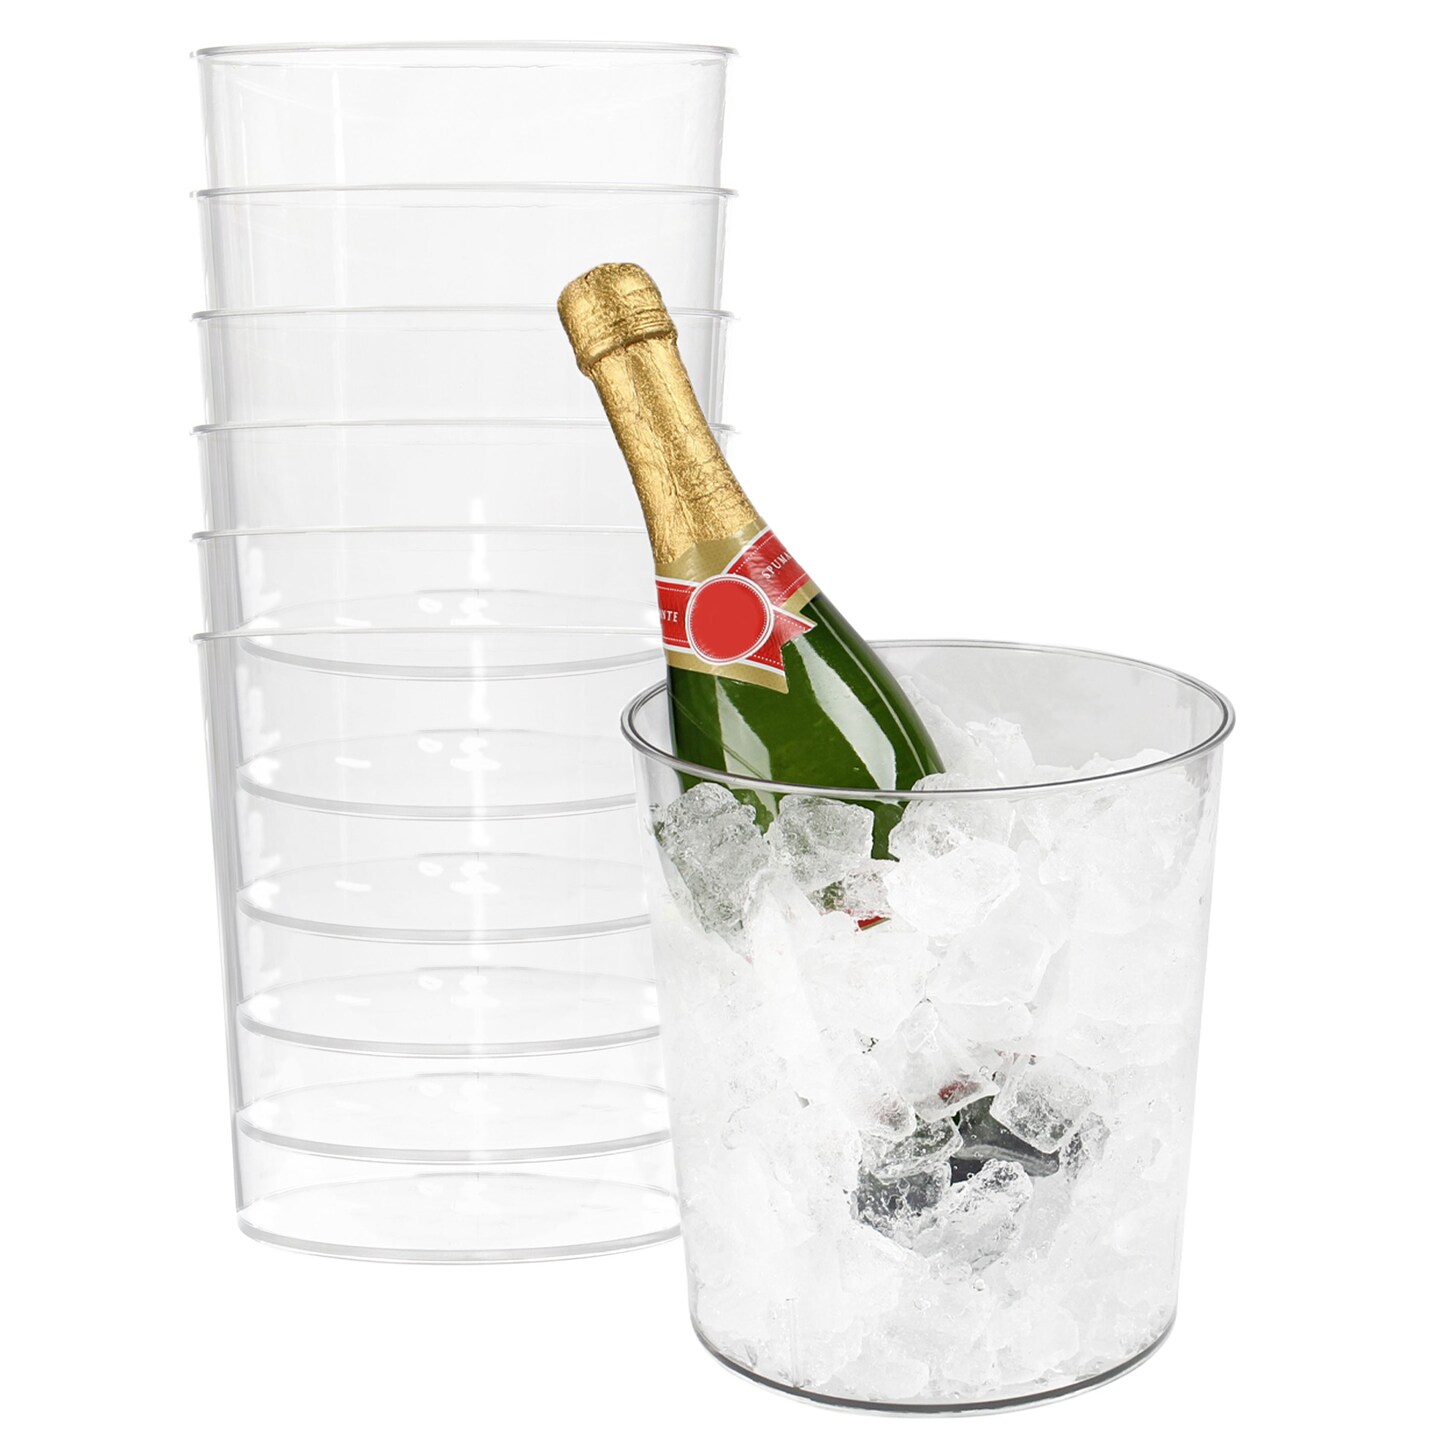 Spec101 Champagne Ice Bucket for Wine 6pk - 2.83L Clear Plastic Beverage Tub